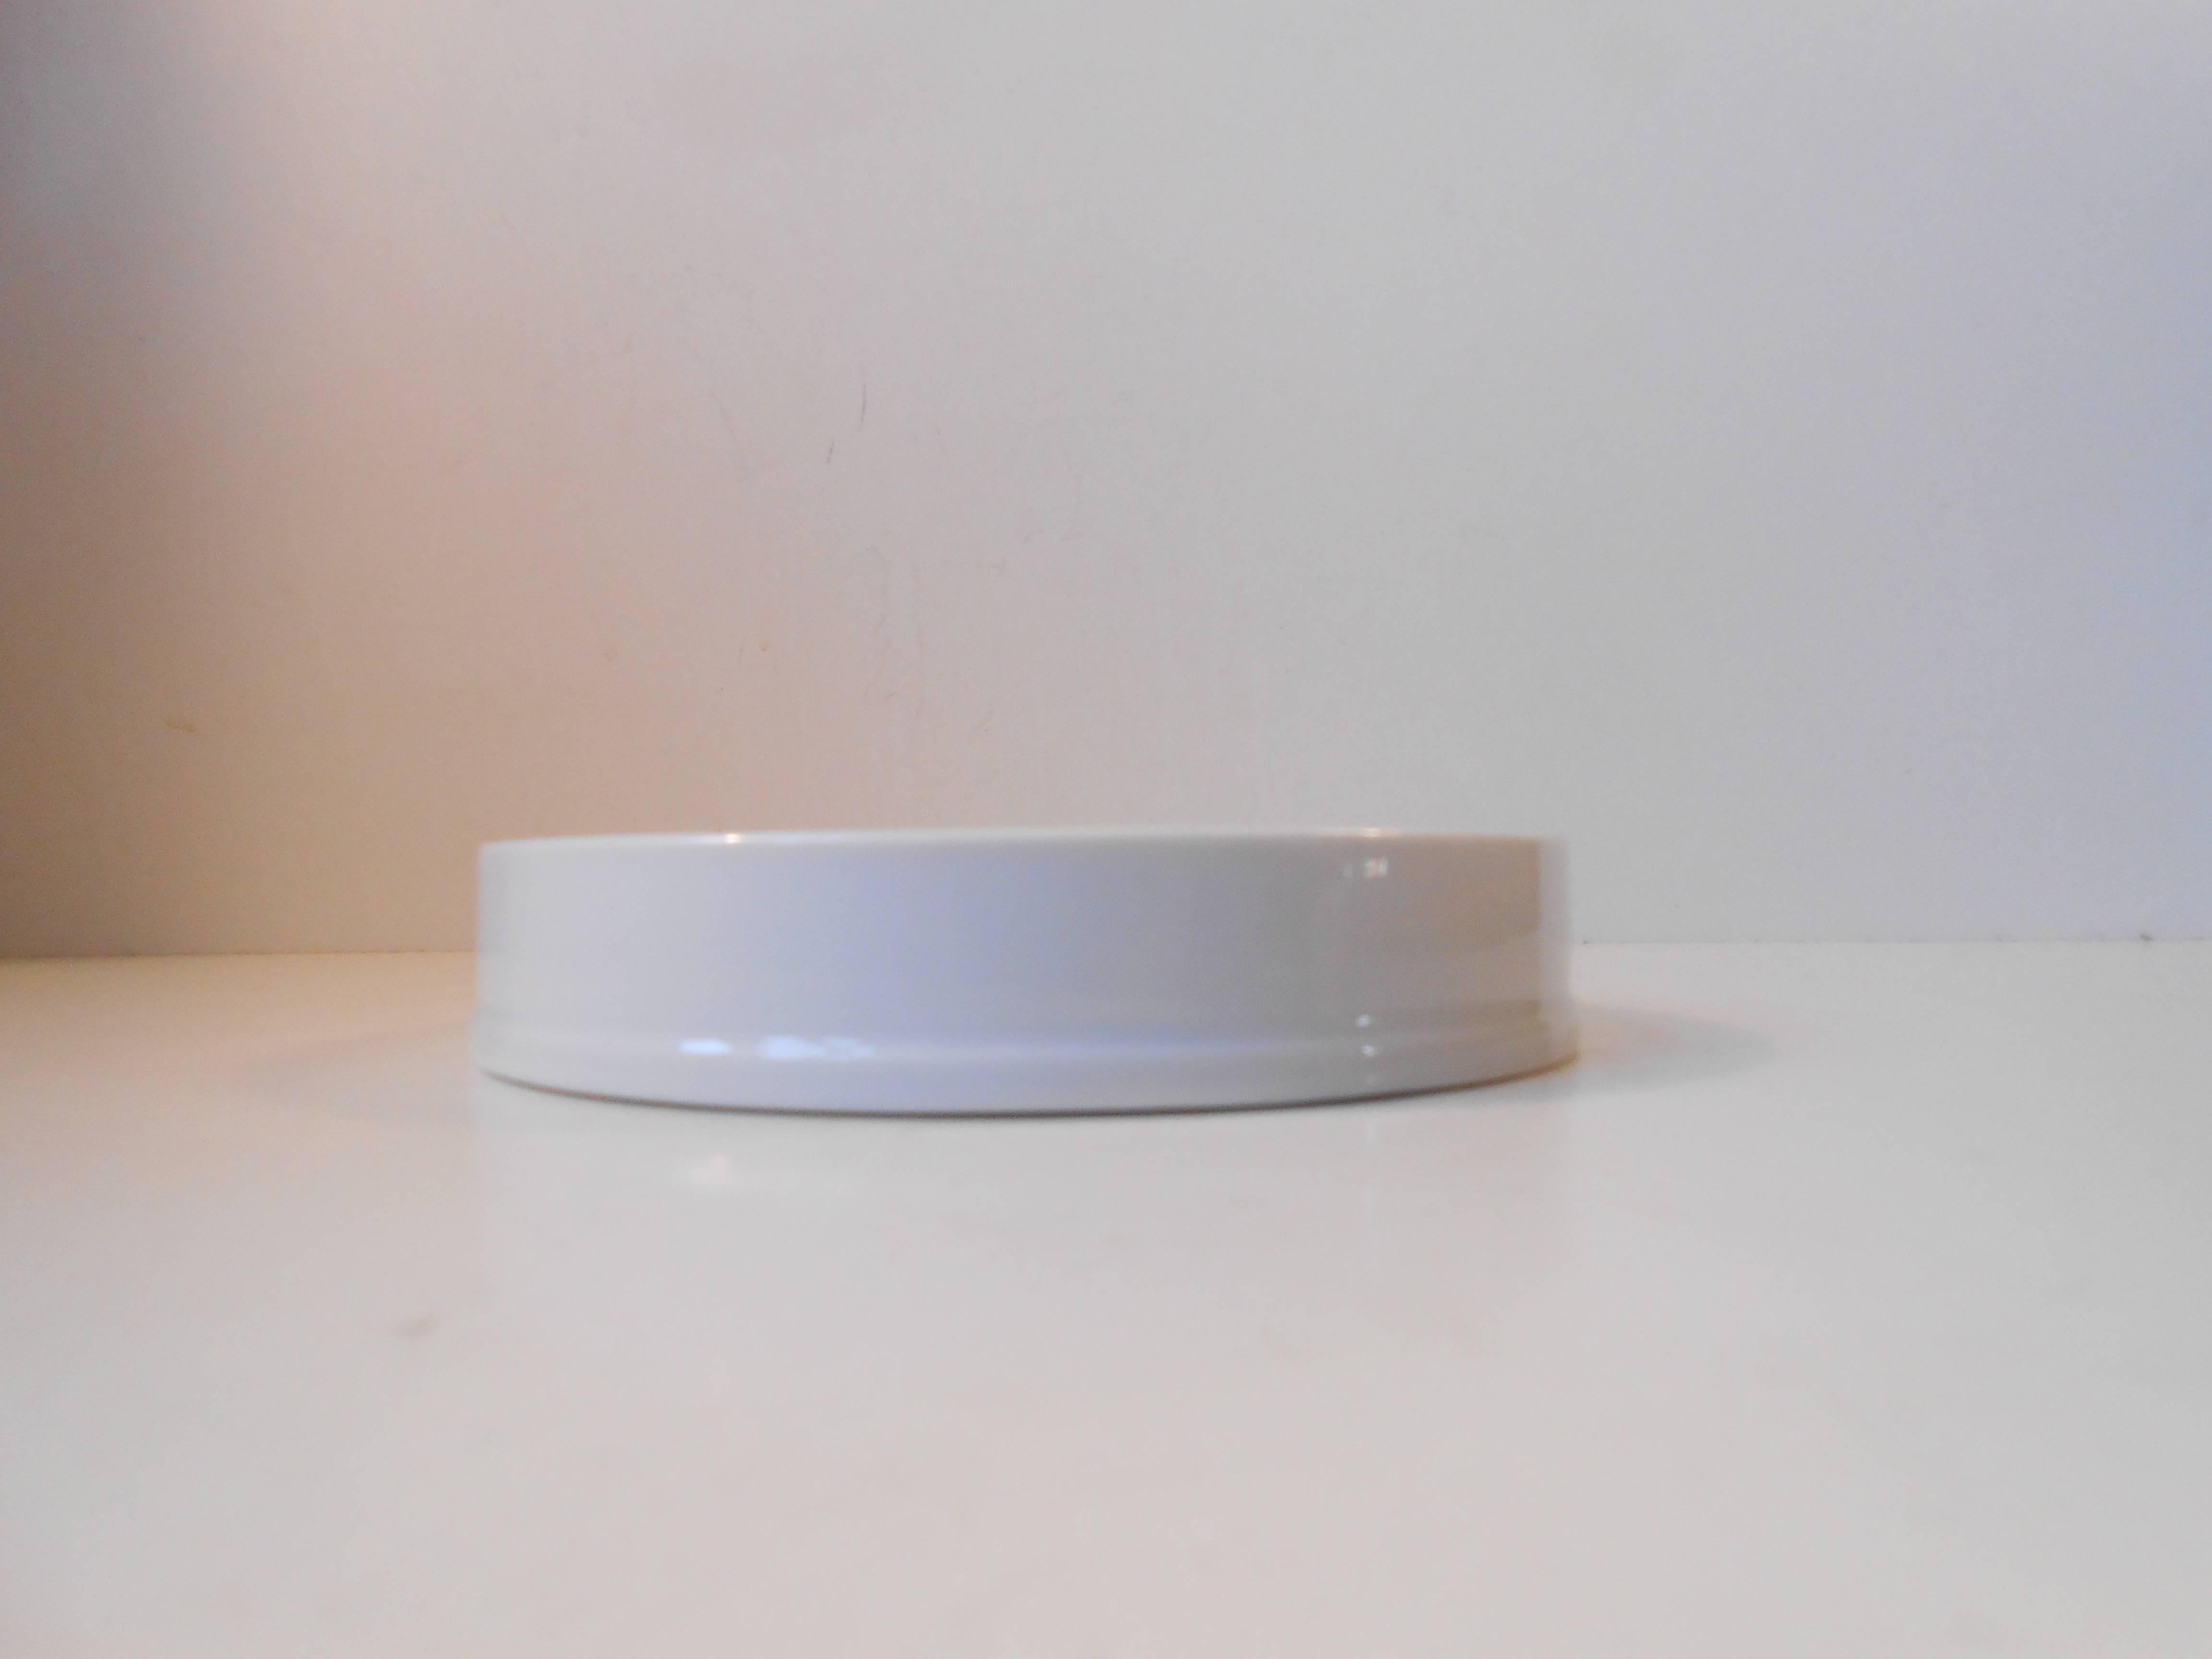 White glazed porcelain ashtray designed by Arne Jacobsen as a part of the total inventory design assignment he did for SAS Royal Hotel in Copenhagen, 1958-1960.
Take a look at my other Danish and Scandinavian Mid-Century Modern, Art Deco and